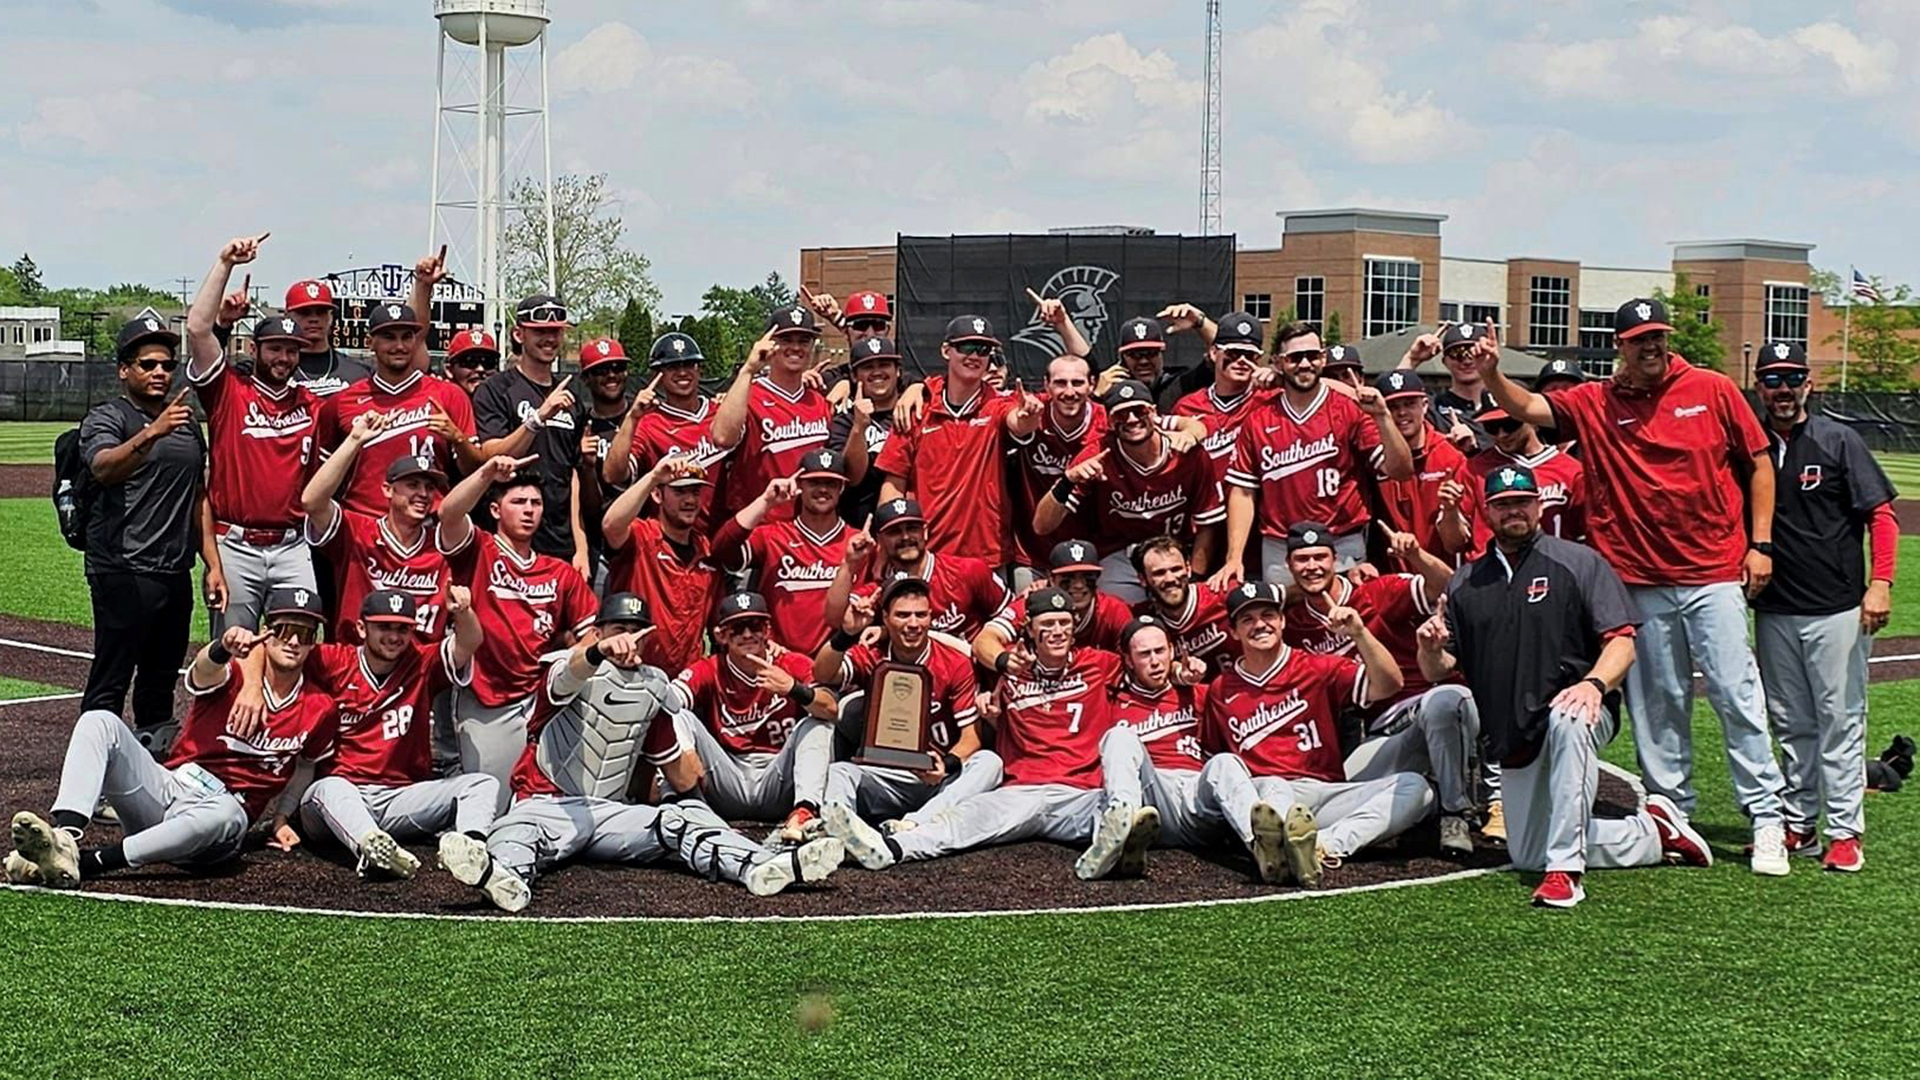 IU Southeast won the Upland Bracket in the NAIA Baseball National Championship on Thursday with a 14-10 victory over Missouri Baptist.